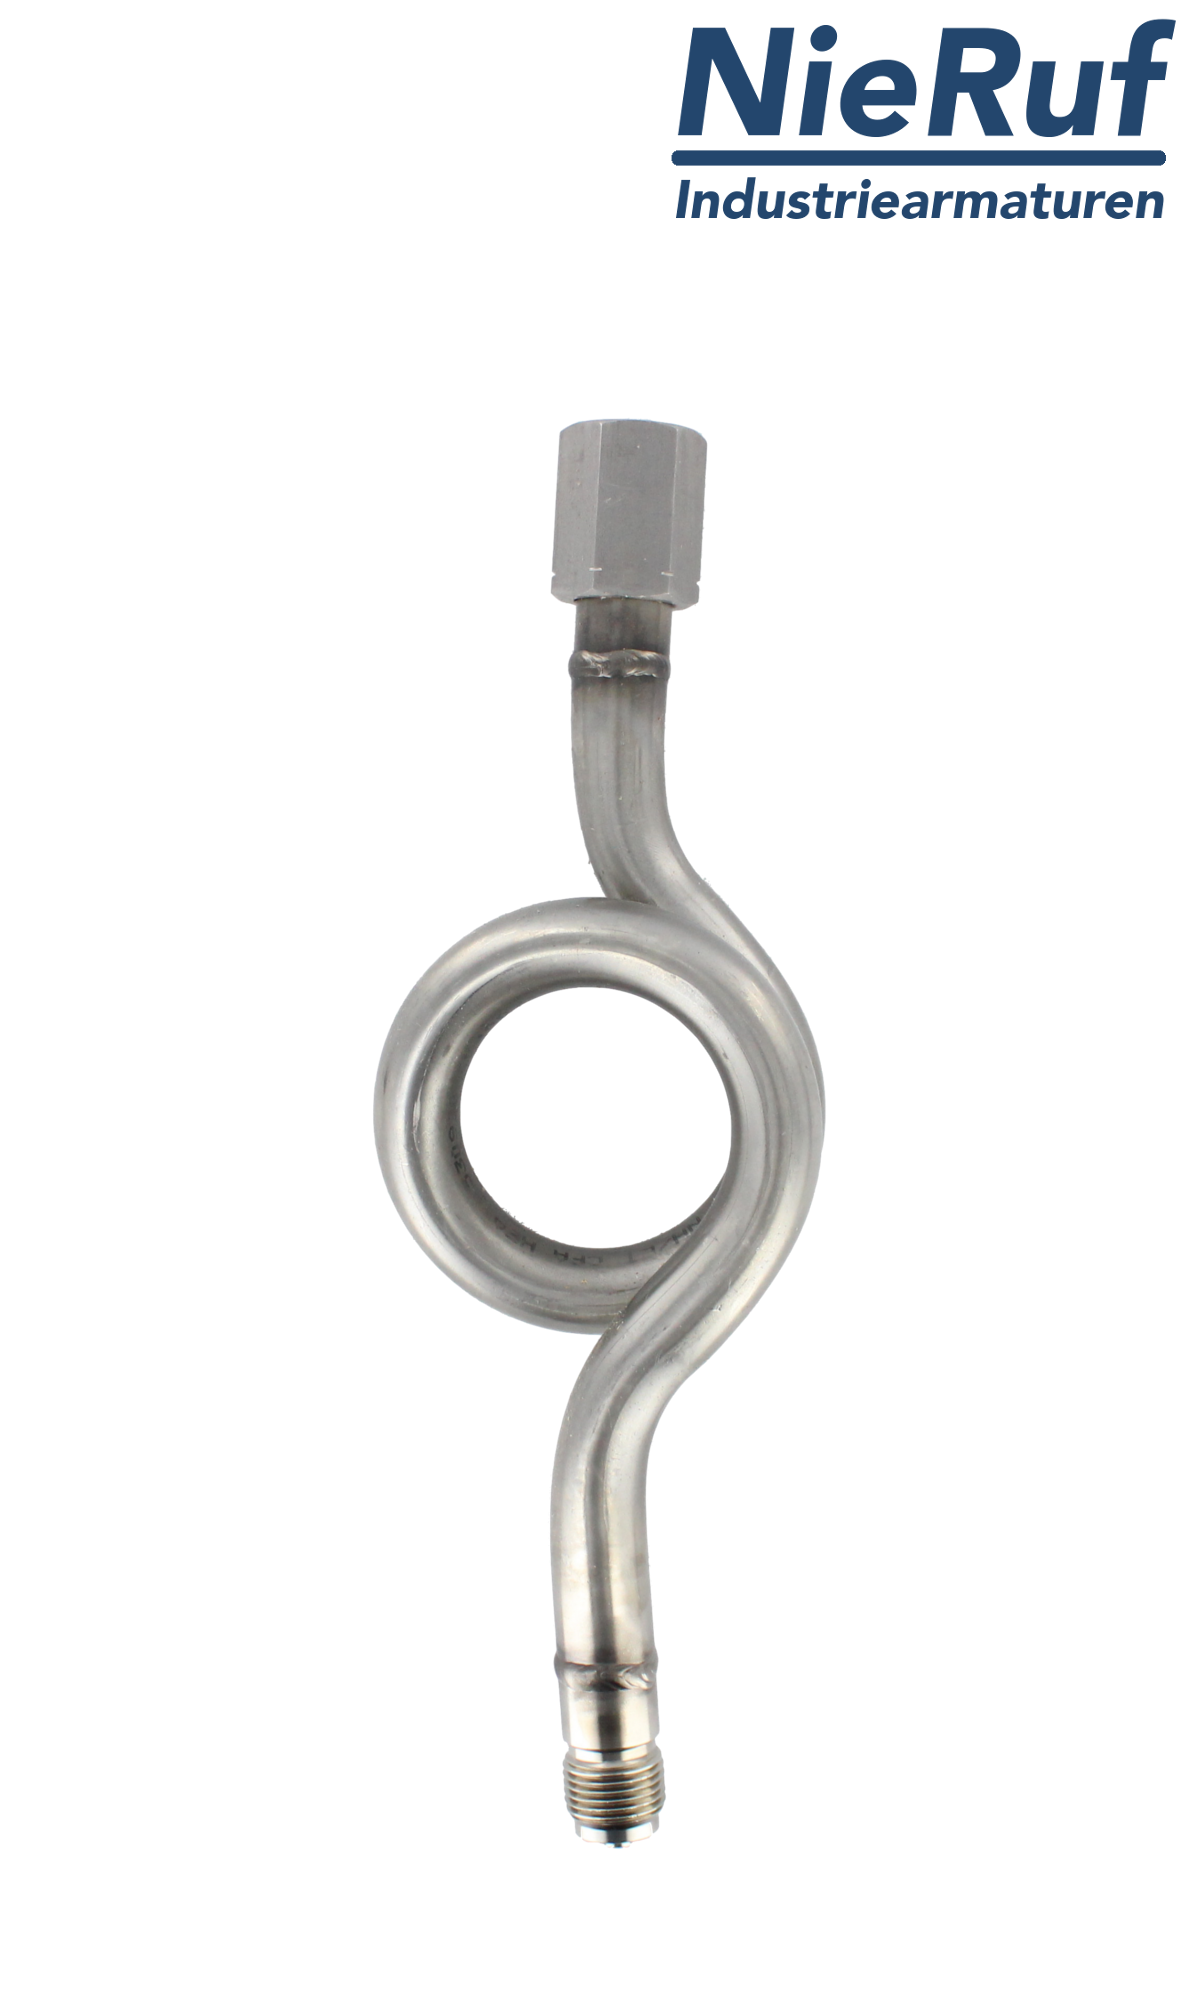 siphon circular acc. to DIN 16282 - form C made of stainless steel 1.4571 in male thread x sleeve 1/2"